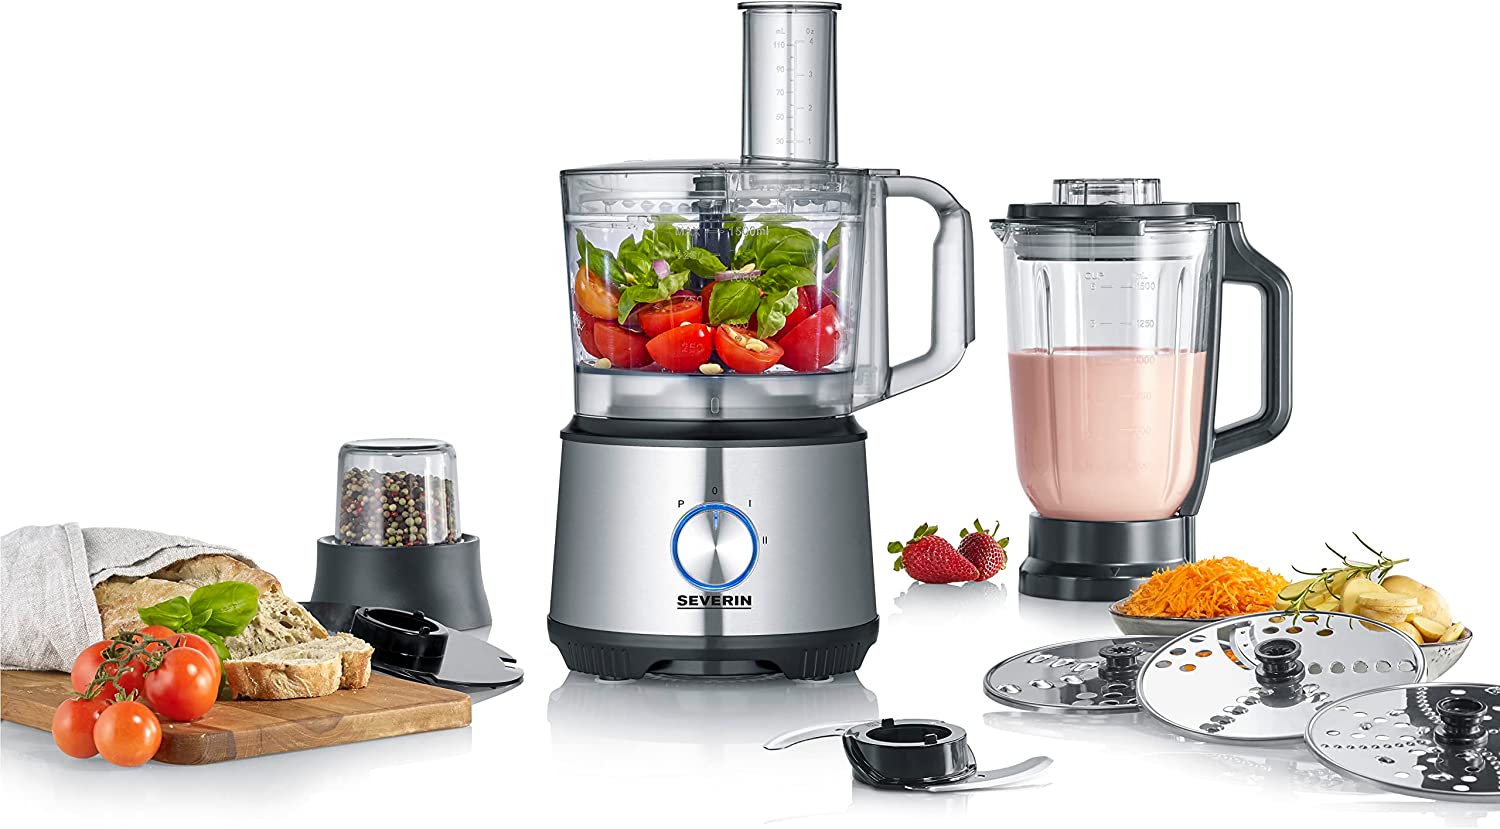 SEVERIN KM 3892 Multifunctional Food Processor for Kneading, Stirring, Gratering, Grinding and Much More, Food Processor with Extensive Accessories, High-Quality Multi-Chopper, Grey